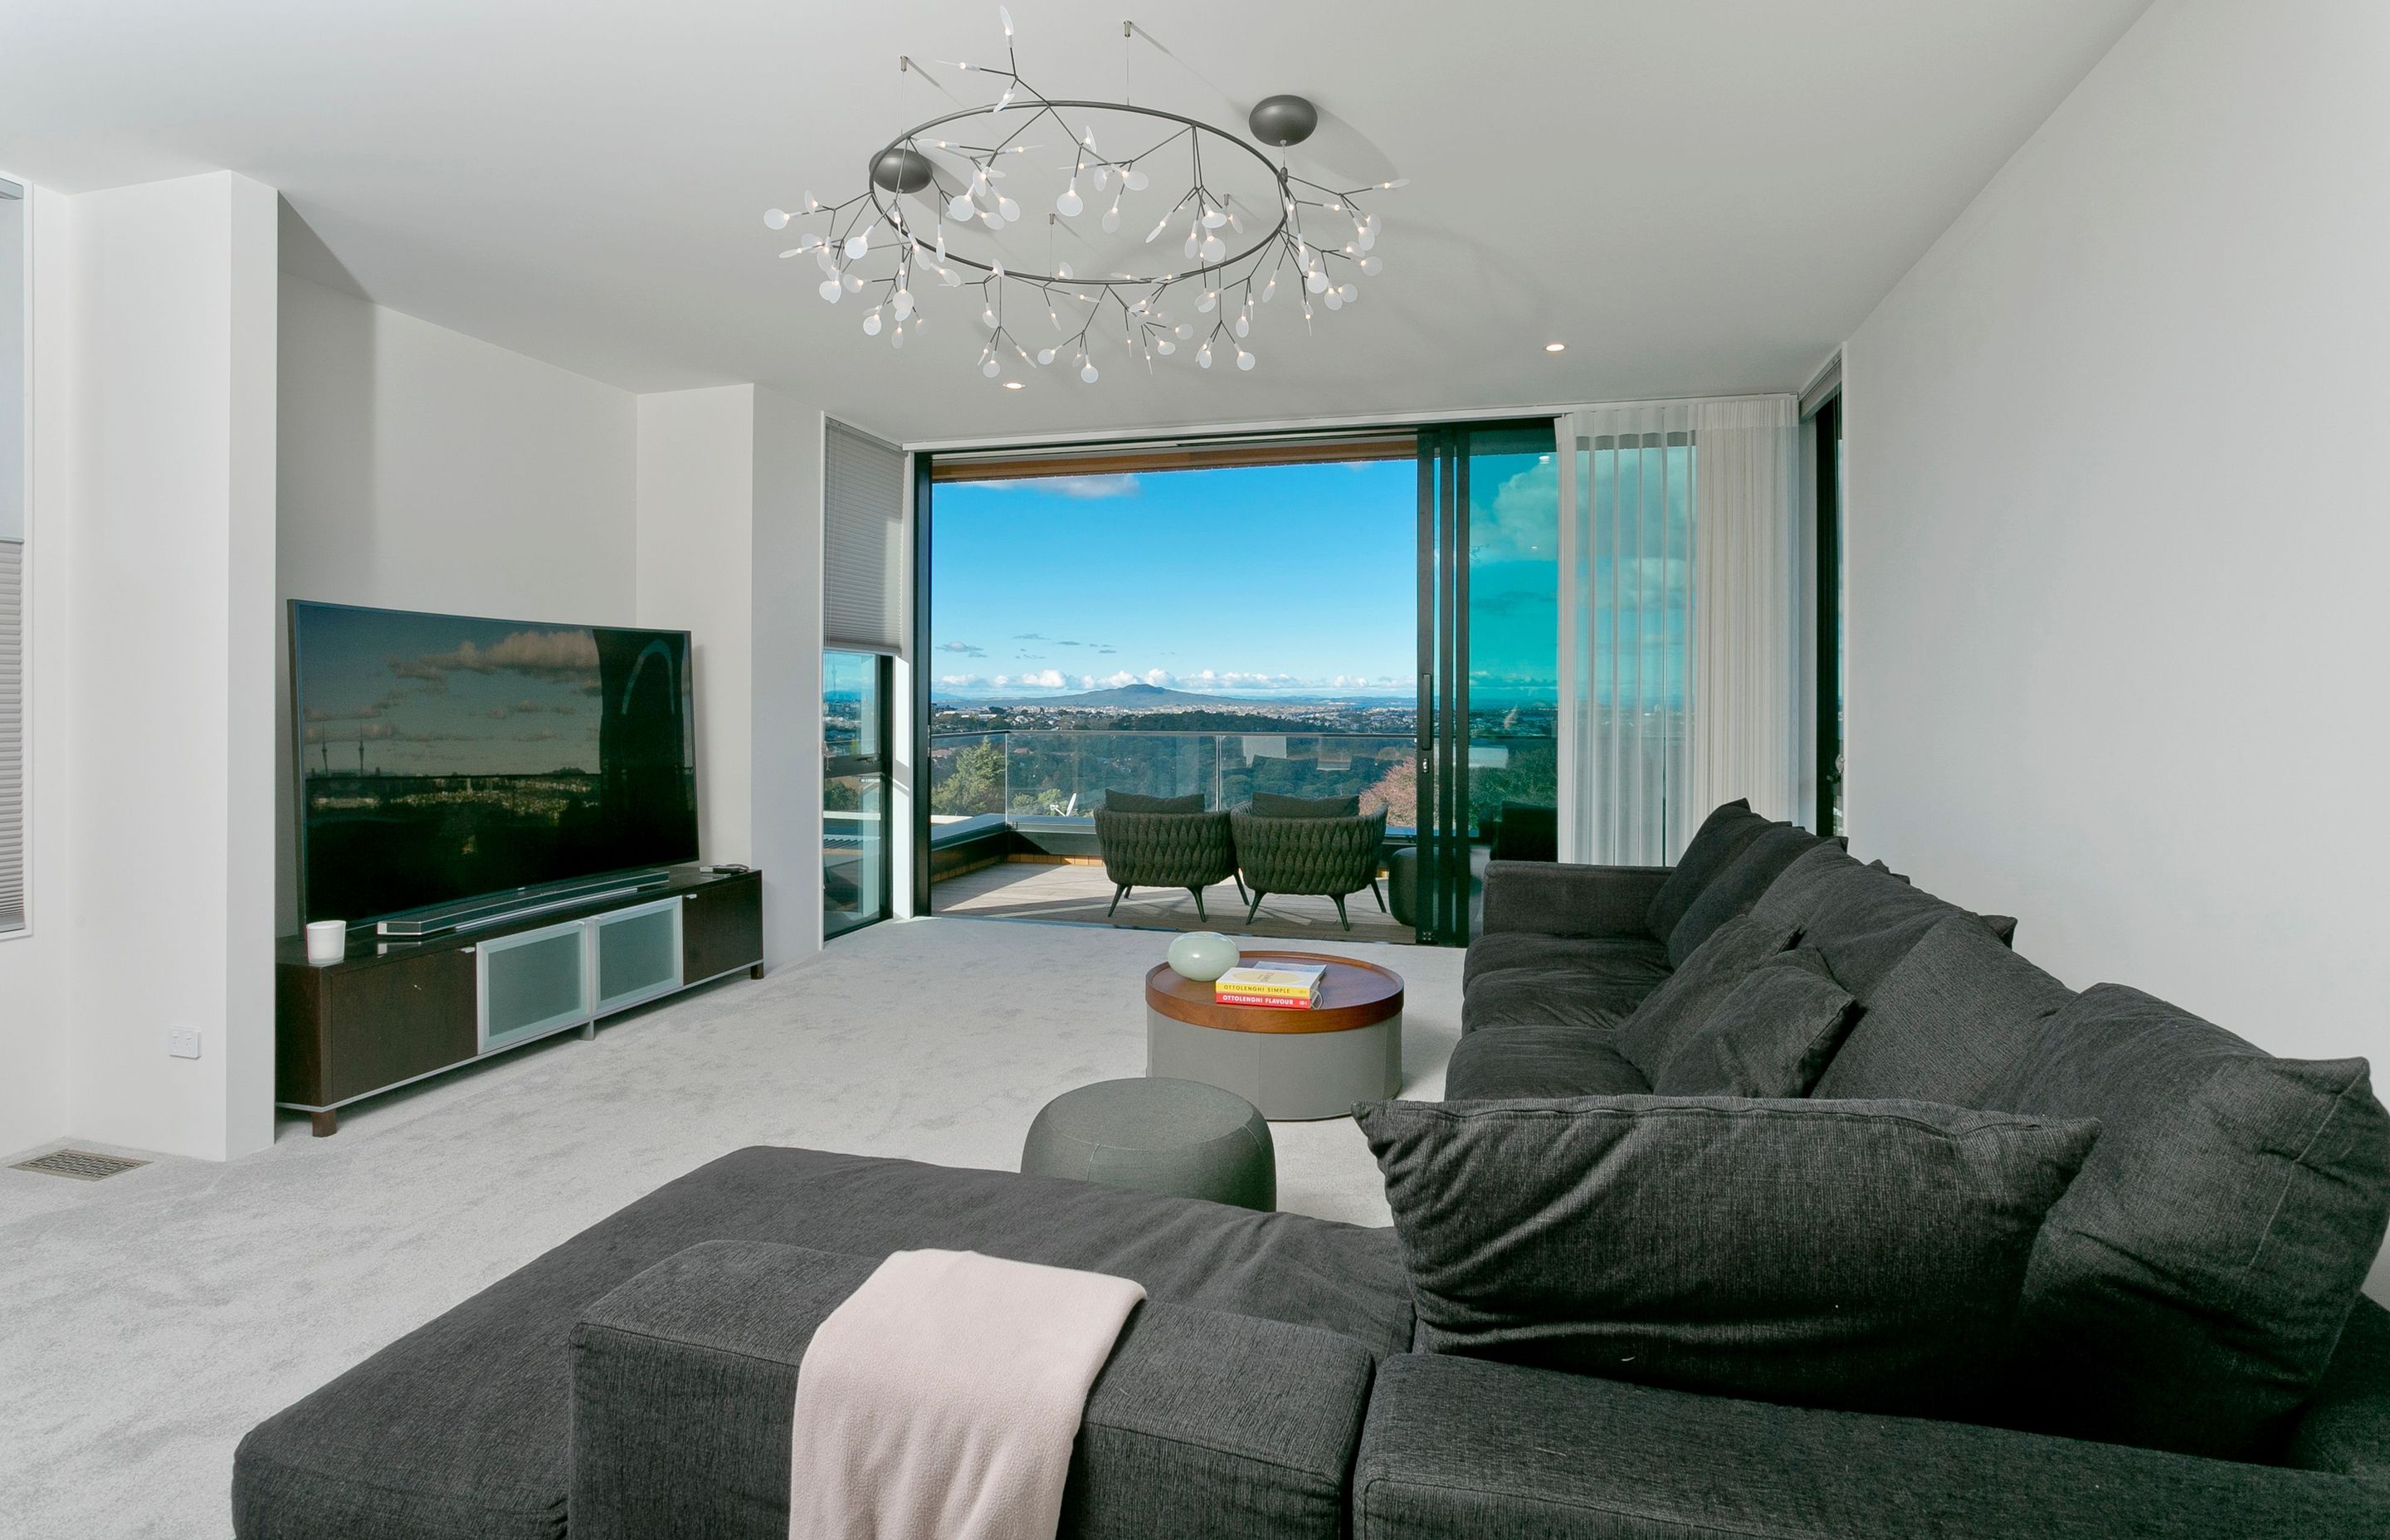 At the rear of the house, a second living area with balcony looking towards Rangitoto in the distance, leads on to the master suite.